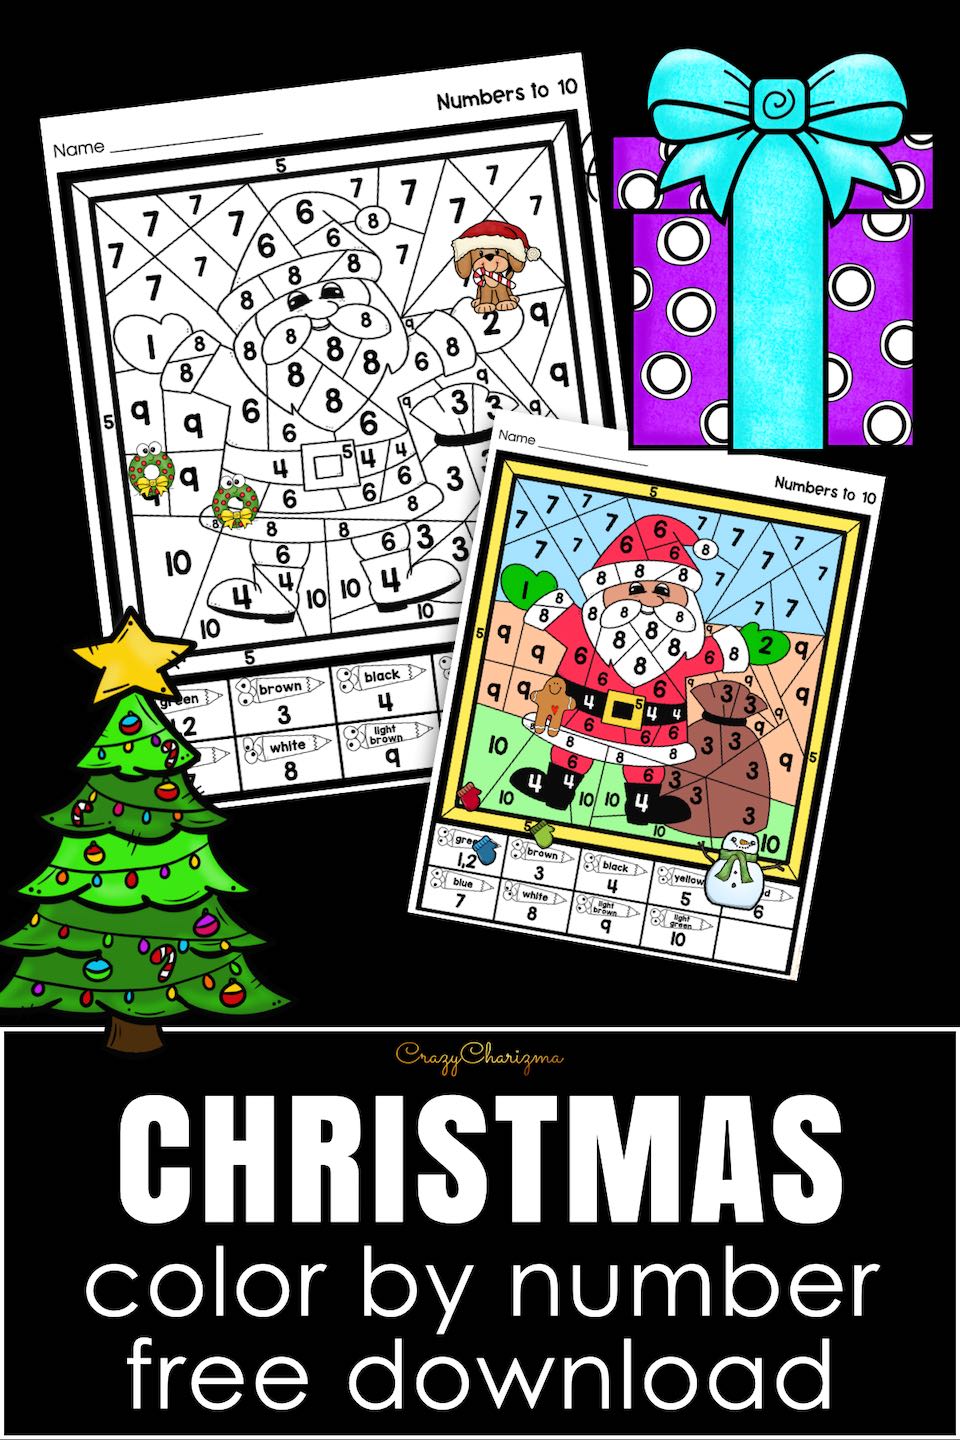 Bring holiday cheer to learning with our Free Christmas Color by Number Printables for preschoolers and kindergarteners. Perfect for educators and homeschoolers to teach number recognition and color matching.